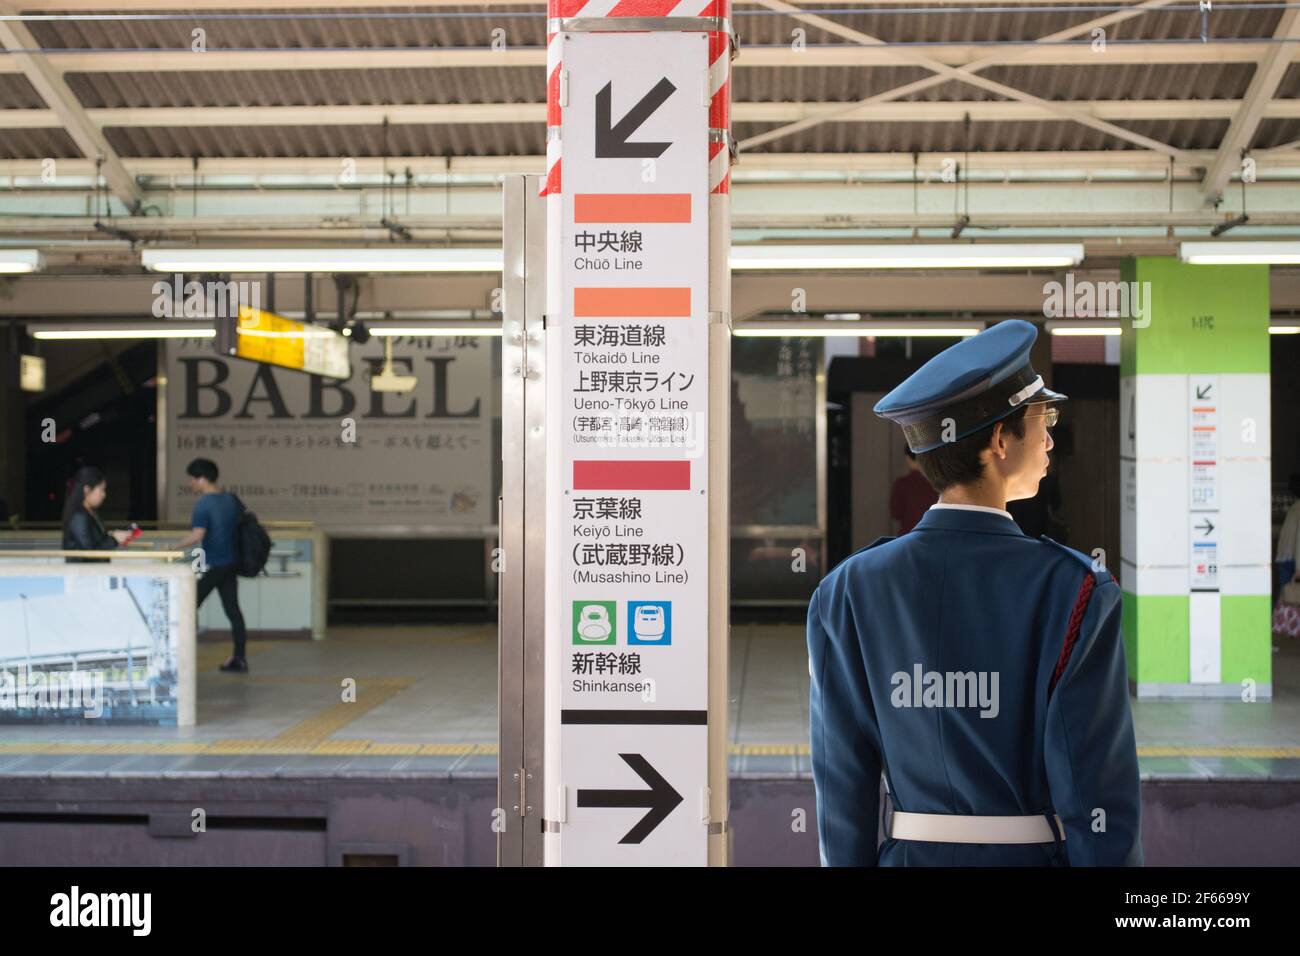 Tokyo, Japan - Japanese train conductor on his duty on the platform. Railway staff watching the train coming. Stock Photo